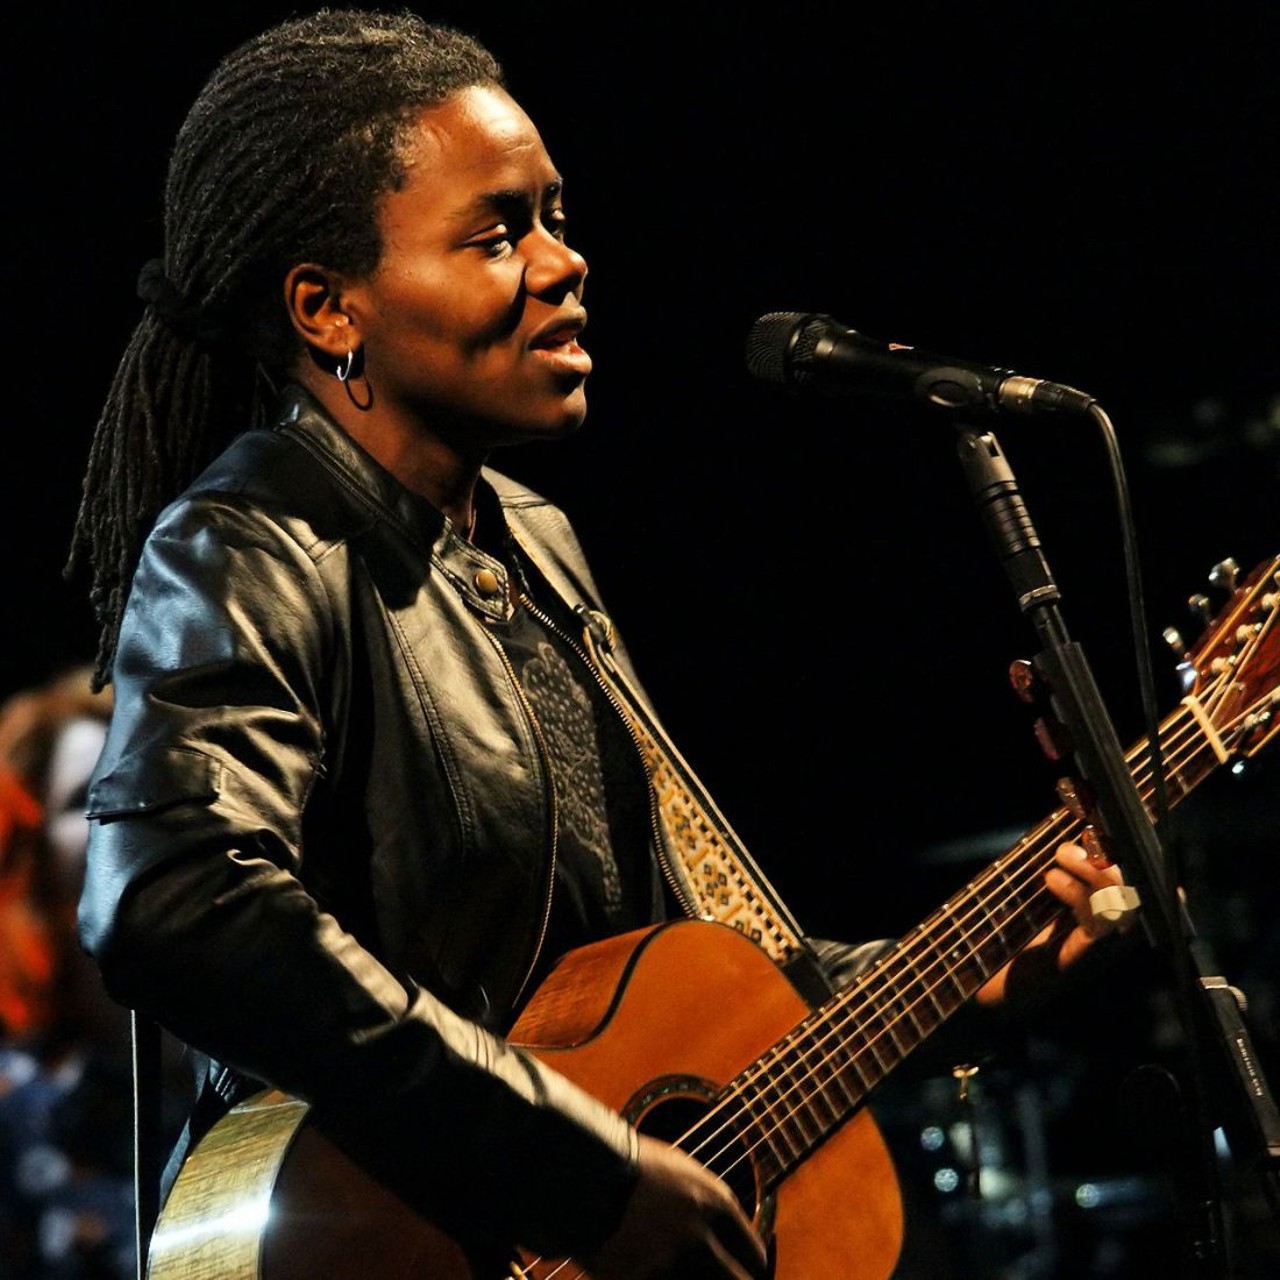  Tracy Chapman
This singer/songwriter grew up in the city of Cleveland. She is known for her hits &#147;Fast Car&#148;, &#147;Talkin&#146; Bout A Revolution&#148;, and many more. Her albums have gone multi-platinum four times and she&#146;s won four Grammy Awards, including Best New Artist, Best Female Pop Vocal Performance for her single &#147;Fast Car&#148; and Best Rock Song for &#147;Give Me One Reason.&#148;
Photo via Wikimedia/Hans Hillewaert